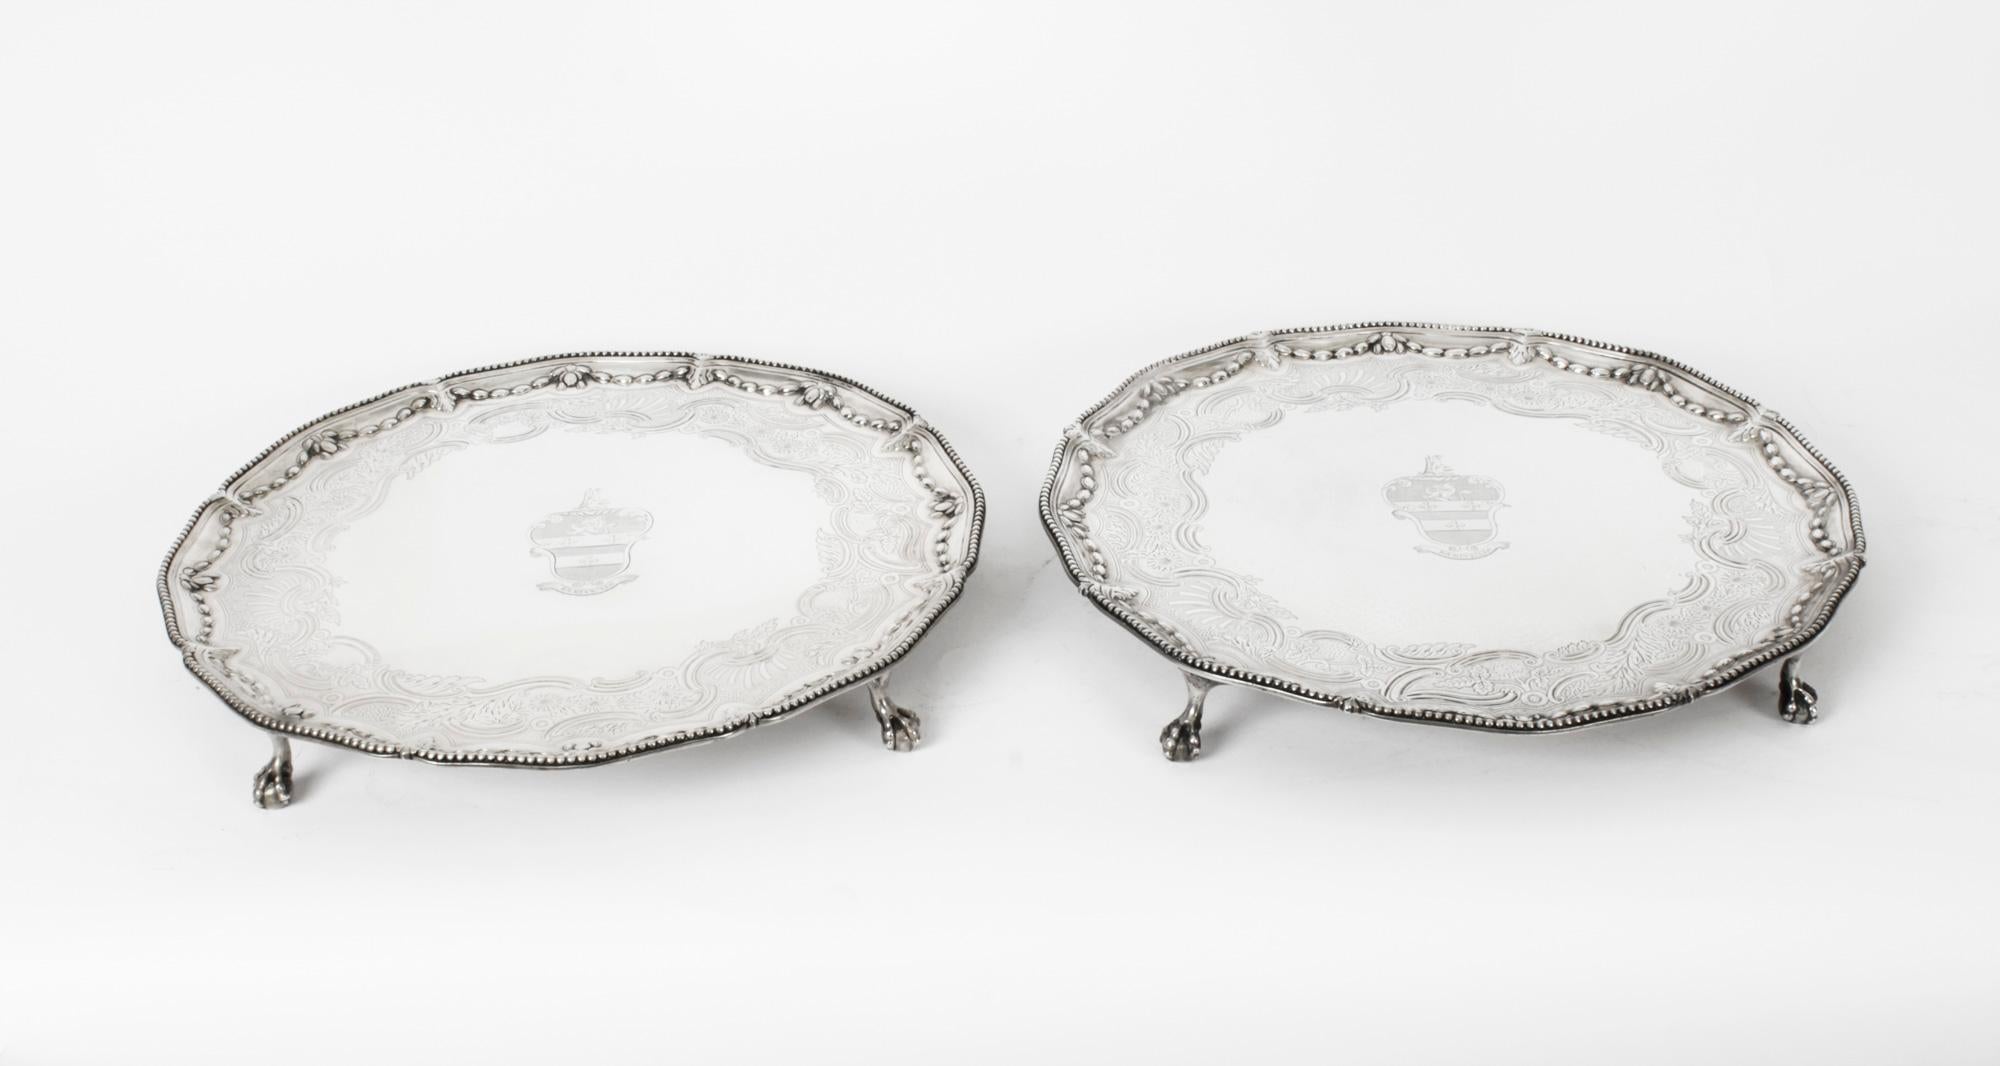 This is a wonderful pair of English 18th Century antique sterling silver salvers by the renowned silversmith John Carter.
 
They each have hallmarks for London 1772, the makers mark of John Carter and are typical of his work with the exquisitely